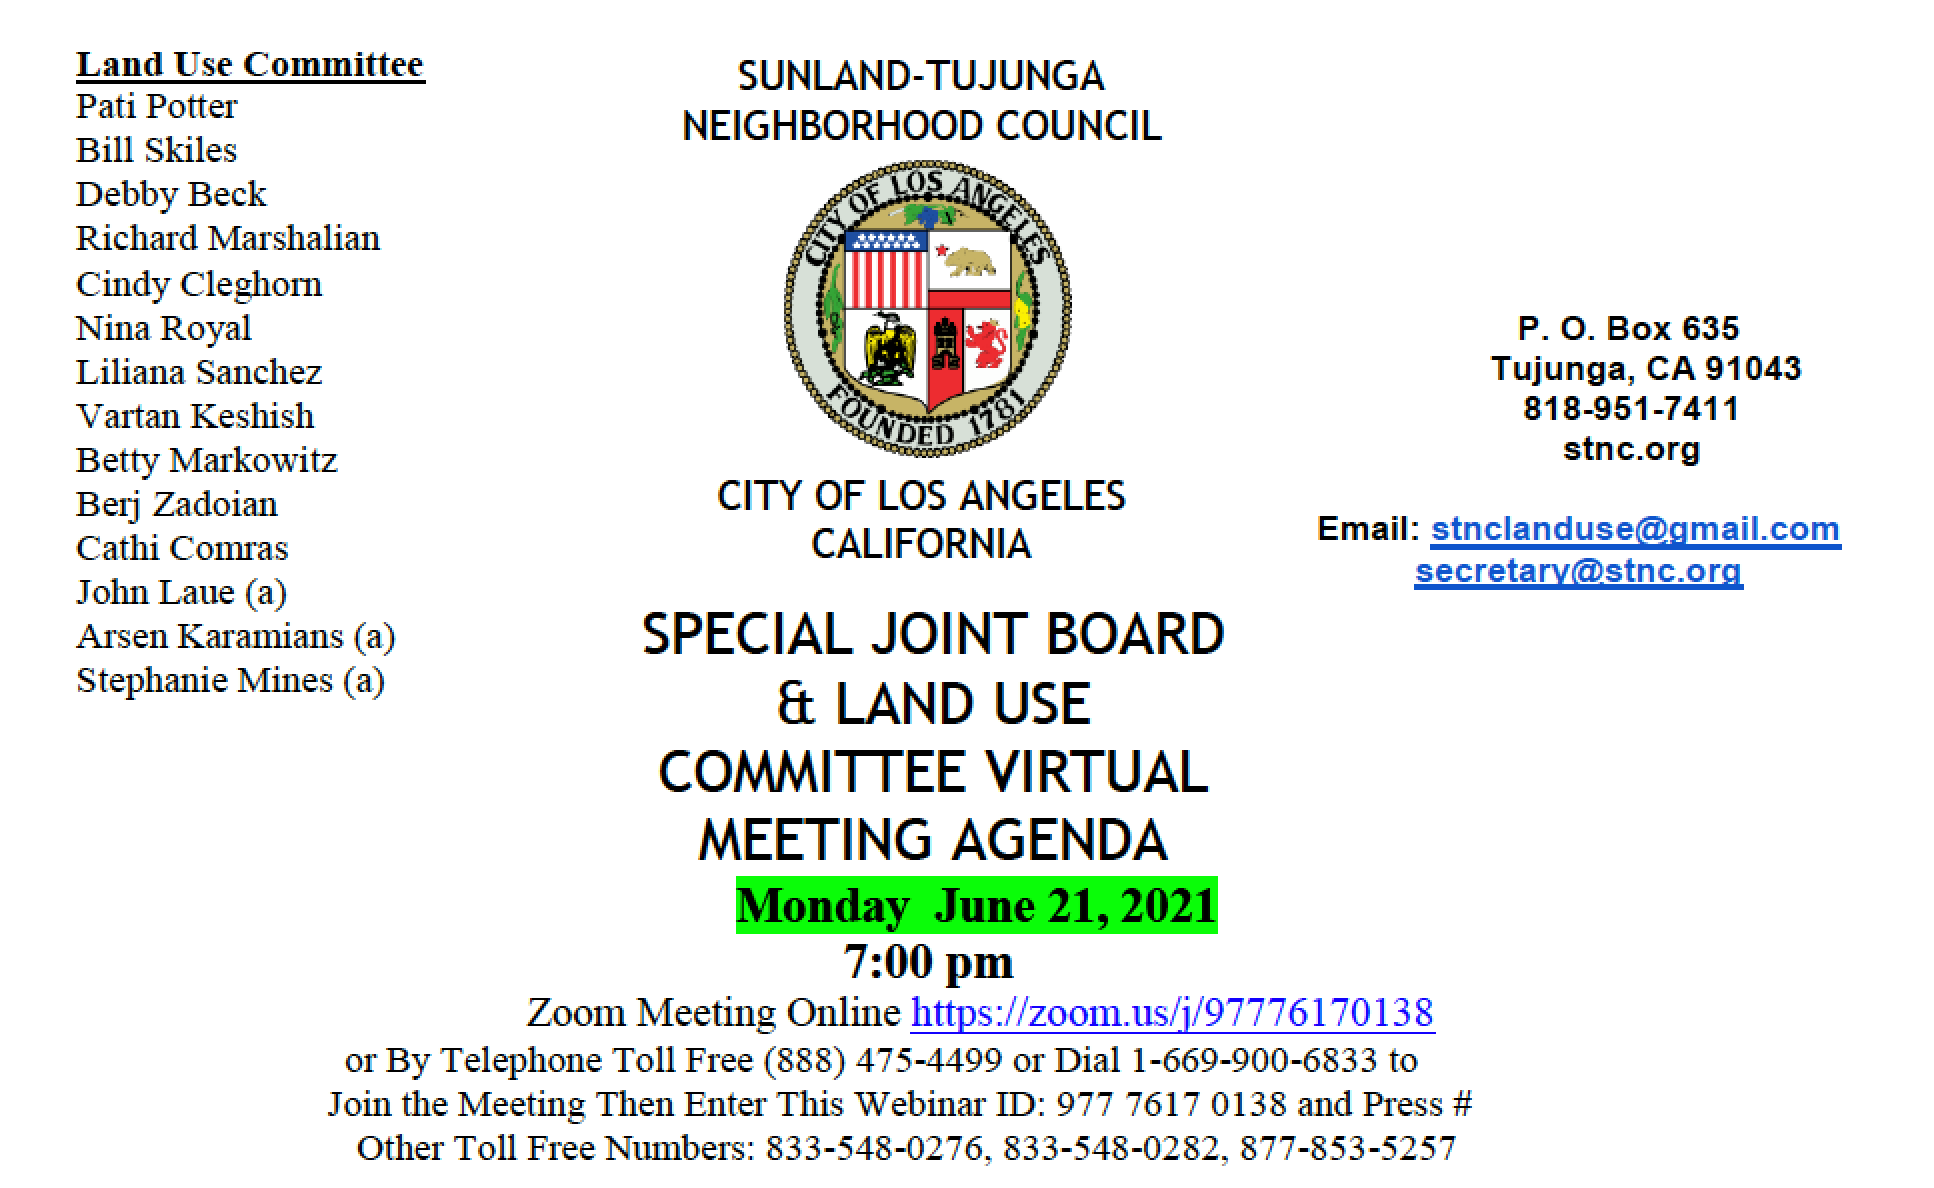 STNC Land Use Committee Meeting Tonight @ 7 PM 